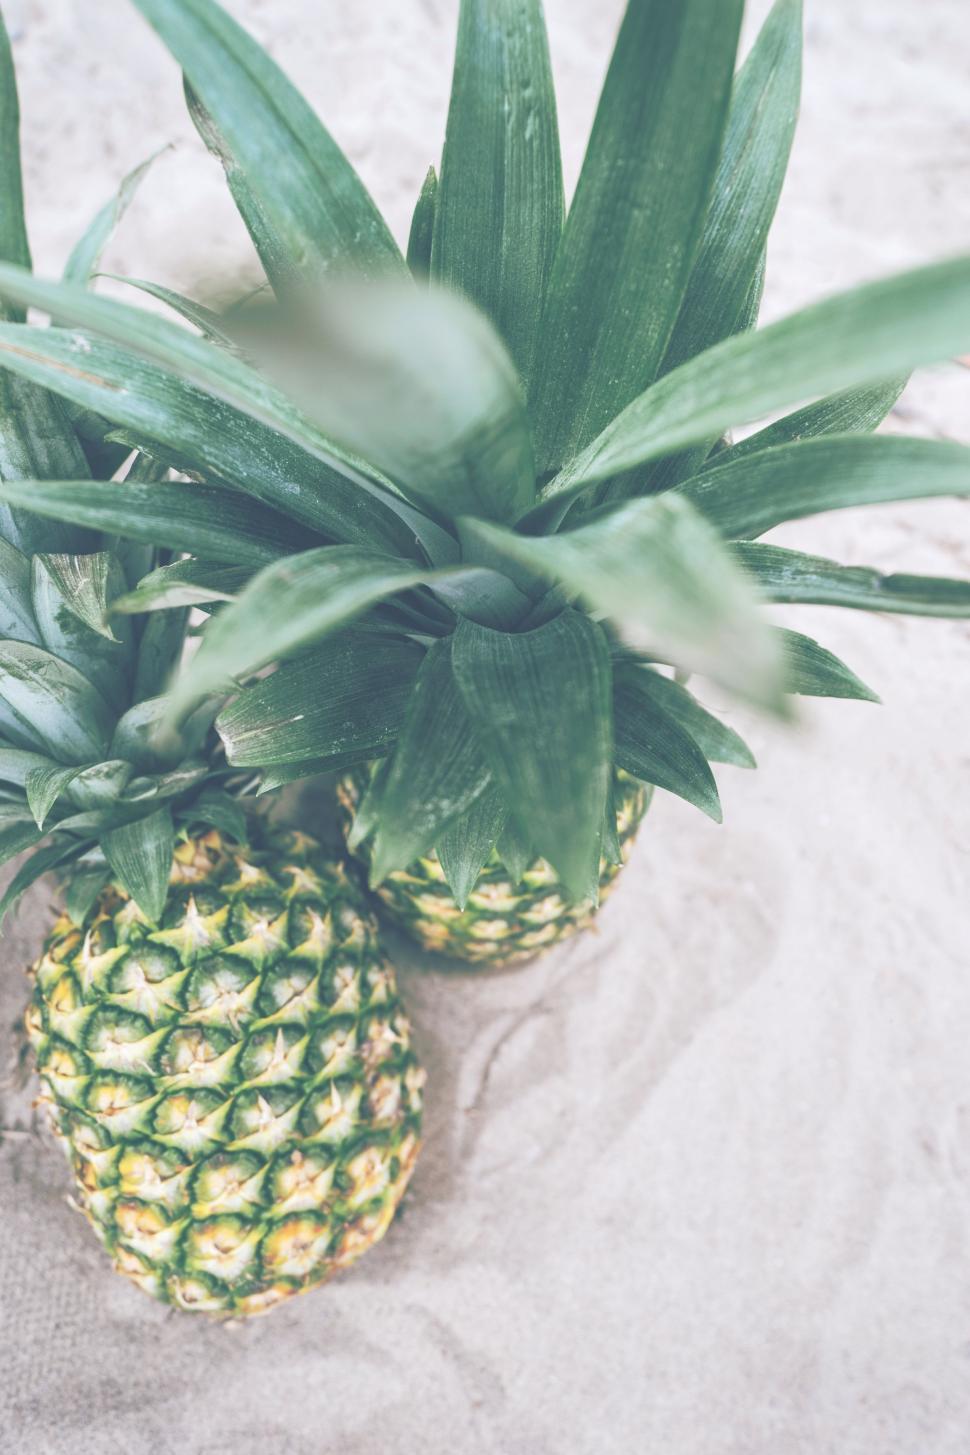 Free Image of Two Pineapples Sitting on a Table 